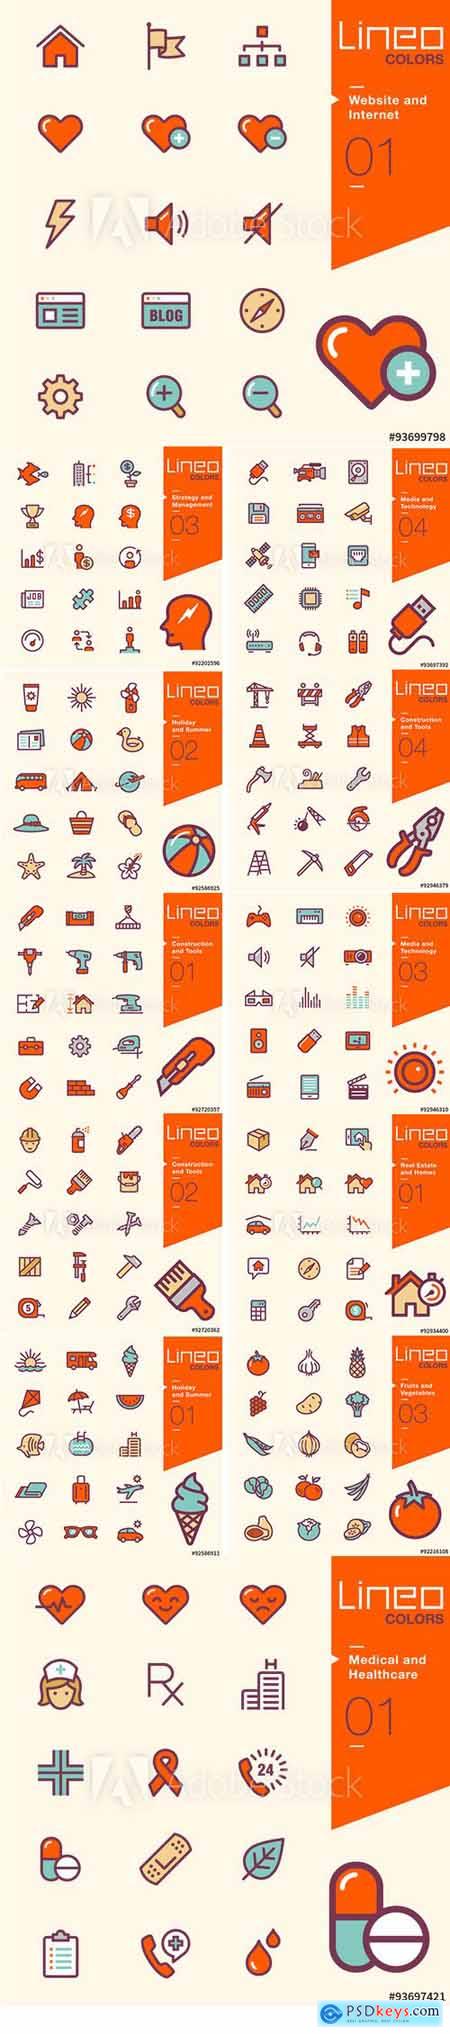 Vector Icons - Lineo Colors Pack Vol 3